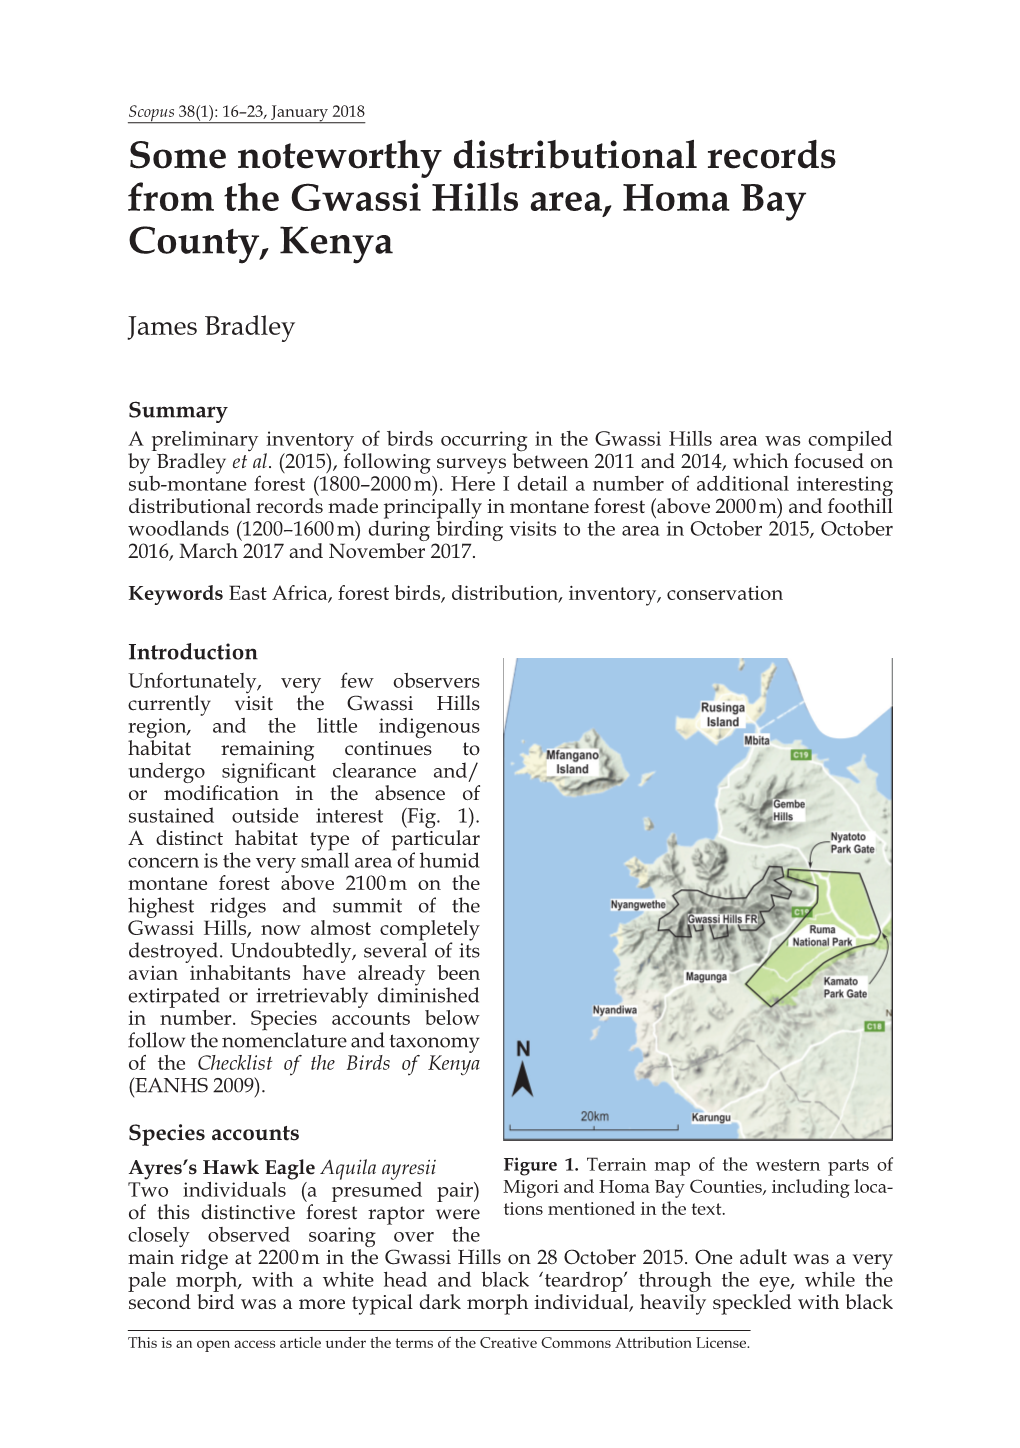 Some Noteworthy Distributional Records from the Gwassi Hills Area, Homa Bay County, Kenya